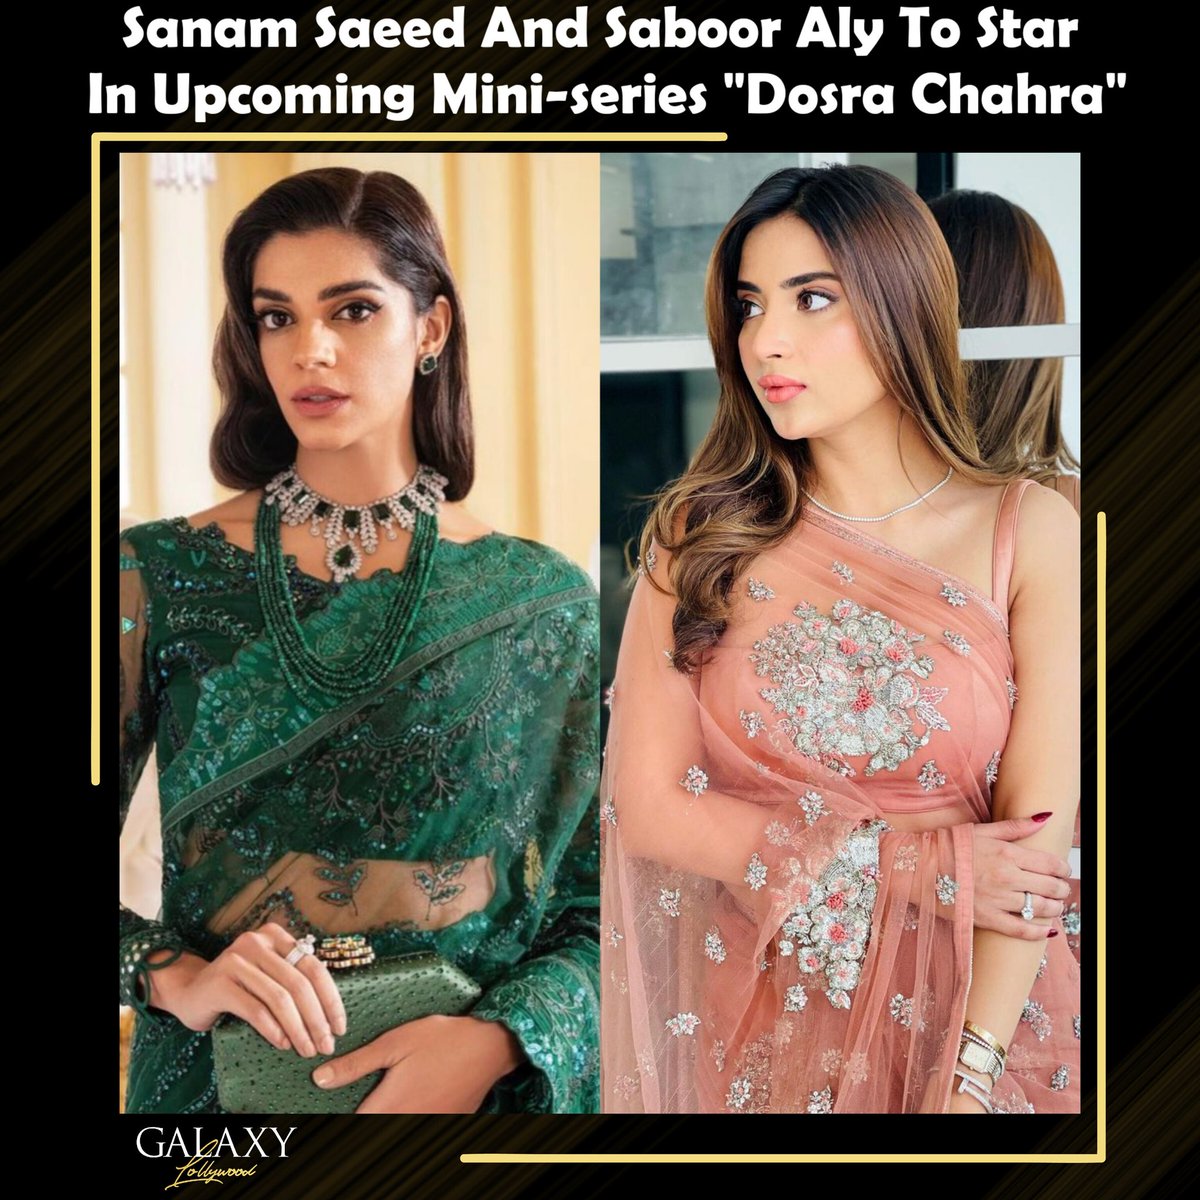 Sanam Saeed is making her much awaited comeback to Pakistani television alongside Saboor Aly in upcoming mini-series 'Dosra Chahra'. The project is written by Rida Bilal and is set to be directed by Sheherzade Sheikh 💫🎬 #SanamSaeed #SanaJaved #RidaBilal #SheherzadeSheikh